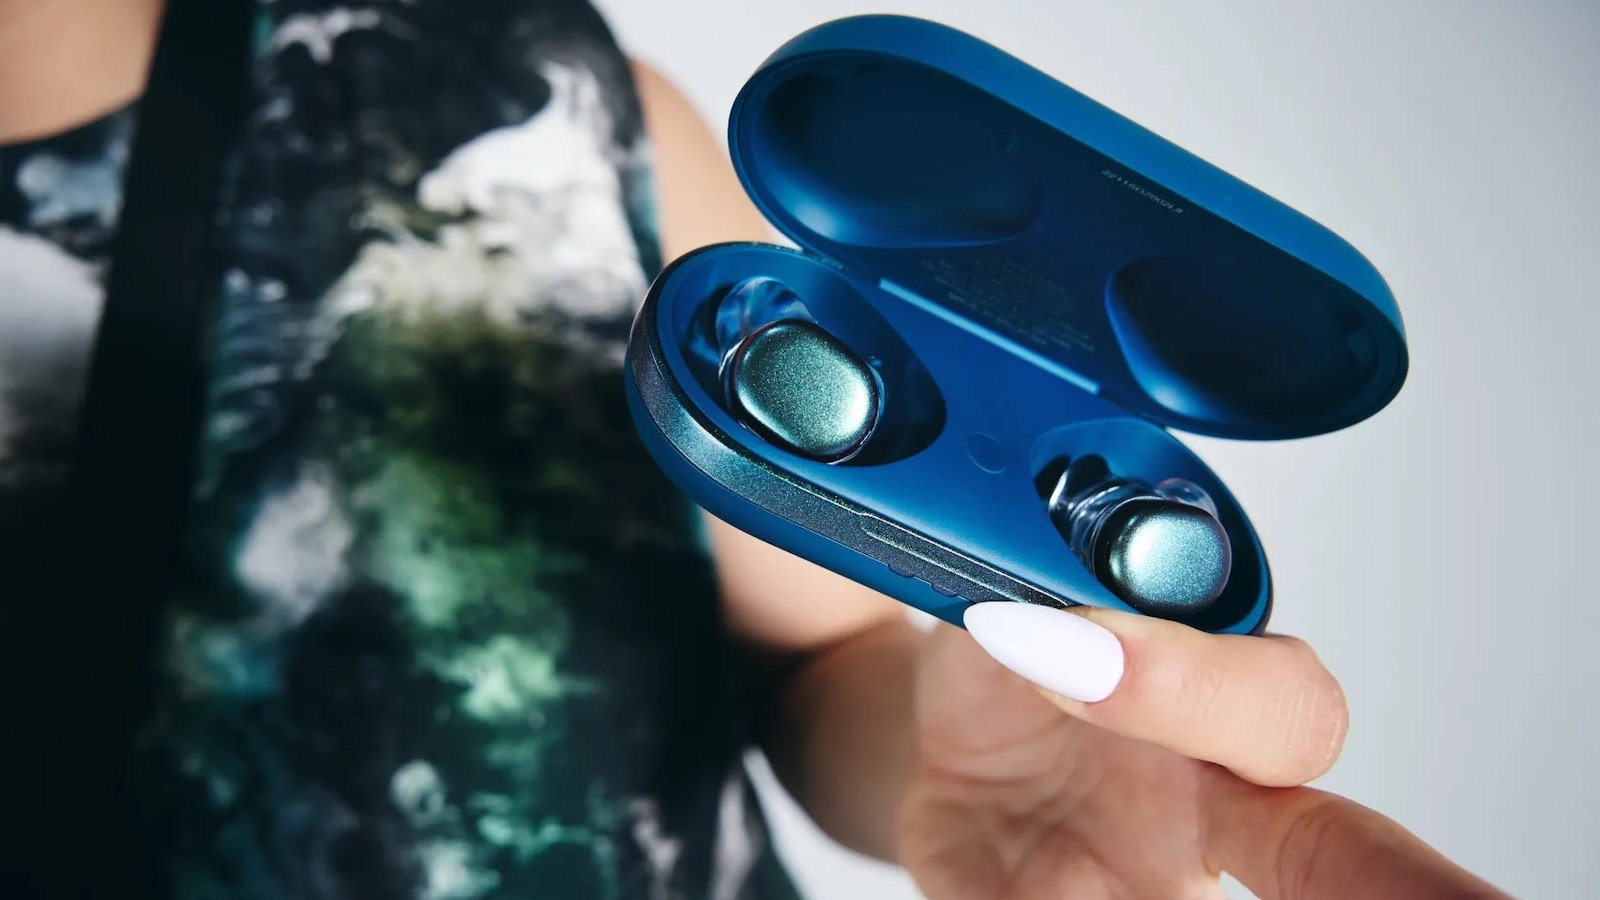 Ultimate Ears UE DROPS wireless earbuds use a FitKit process to create customized molds